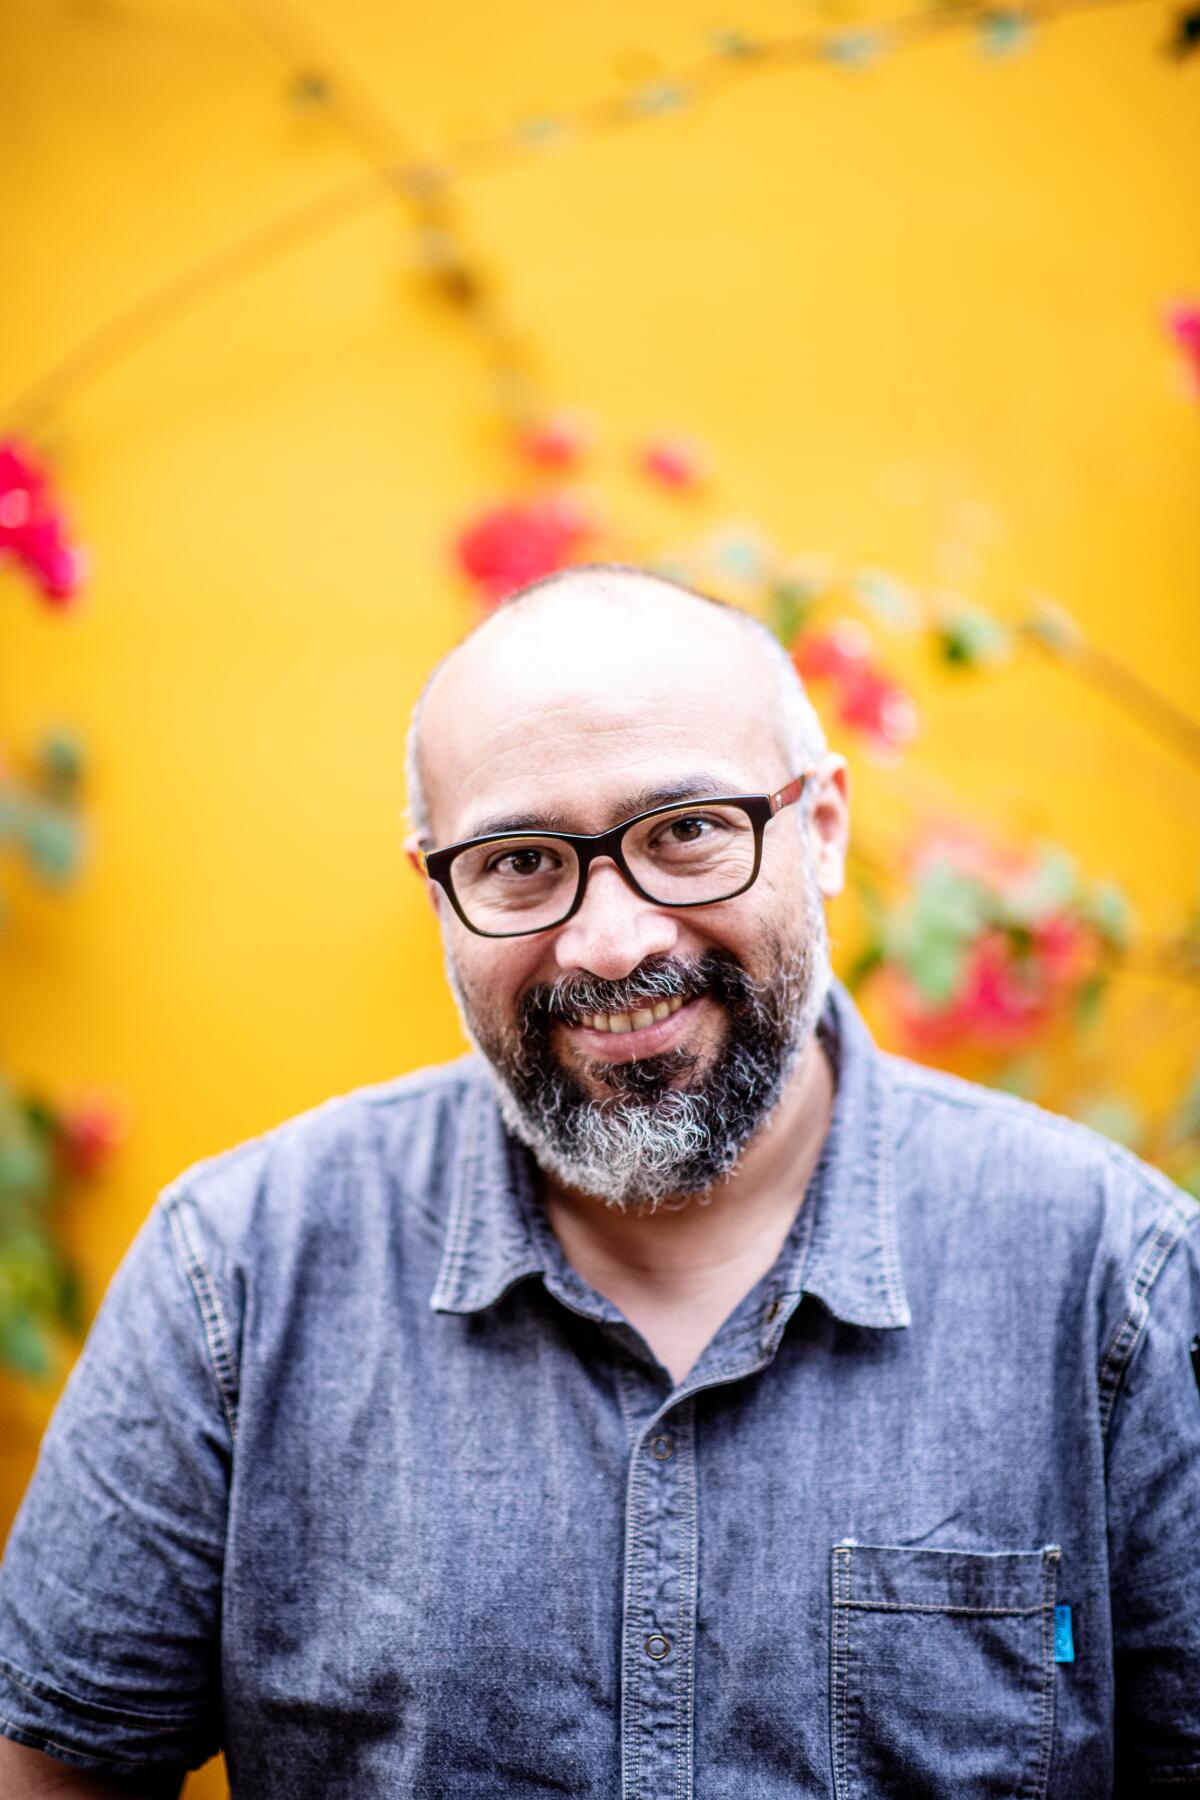 A portrait of Gilberto Cetina wearing glasses and a denim shirt against a yellow wall.